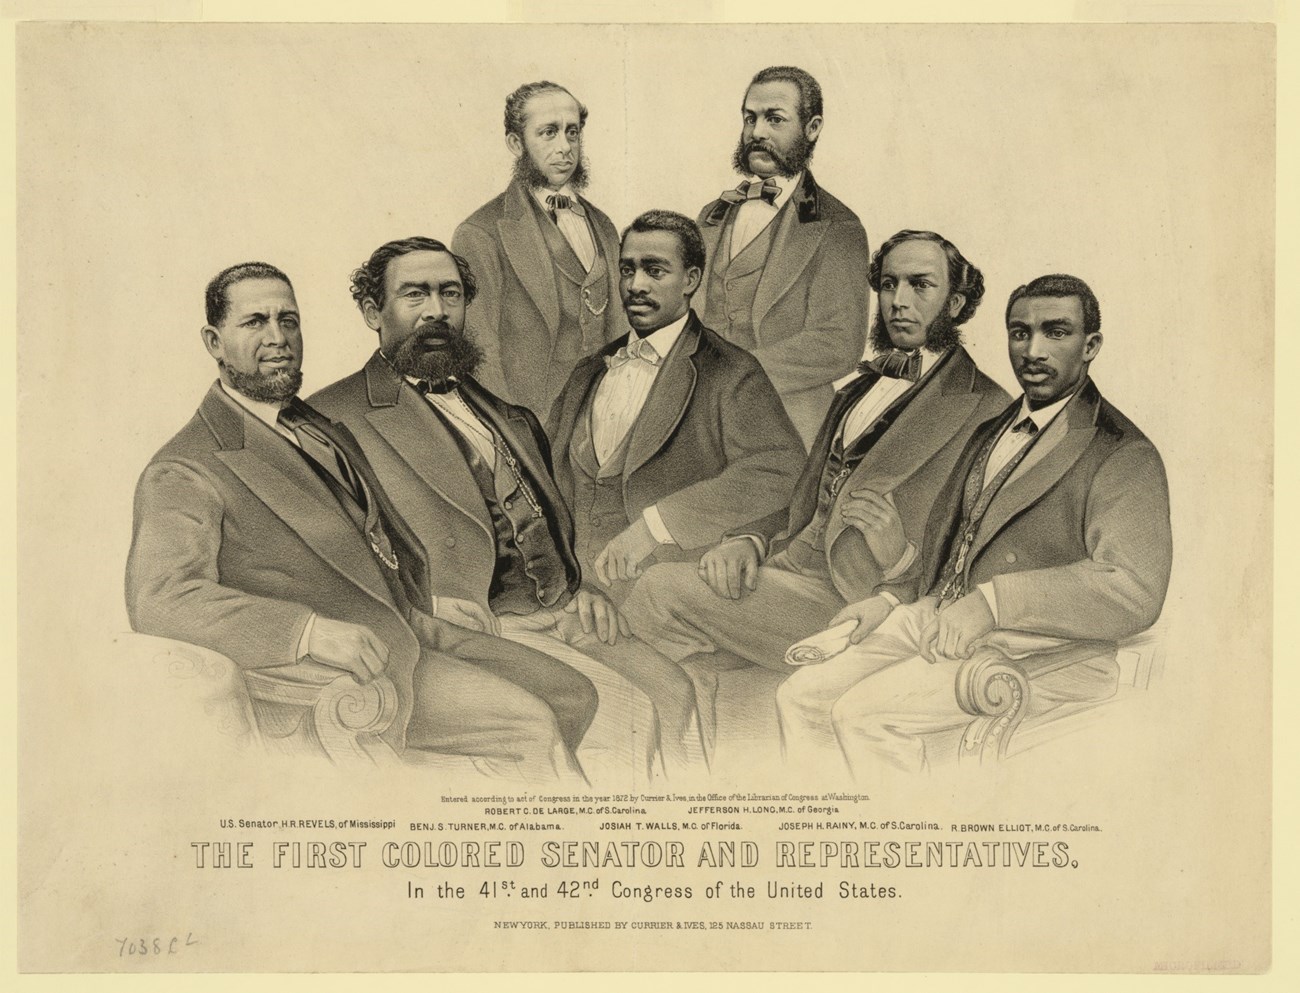 Seven African American men sitting together and wearing suits and bow ties. Text reads "The First colored Senator and Representatives."